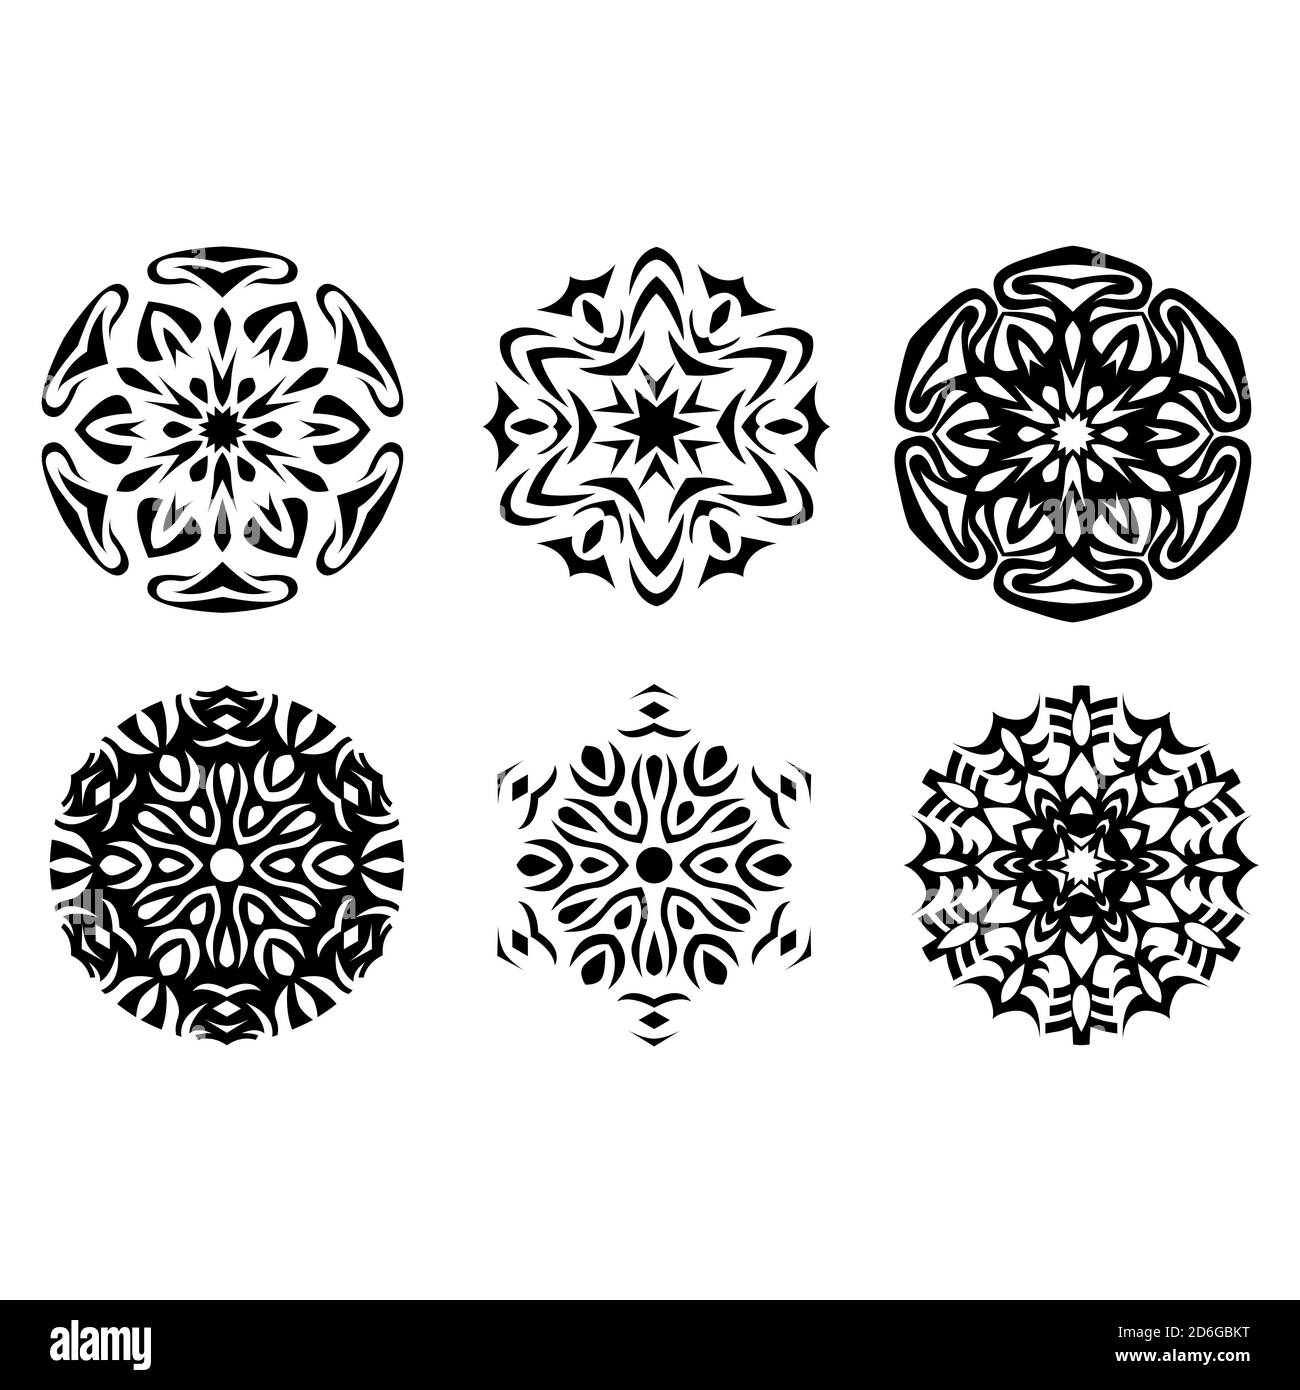 Vector snowflakes set. Holiday illustration. Snow New Years ornate. Christmas element Snowflake silhouette clipart. Winter decoration. . Vector illustration Stock Vector